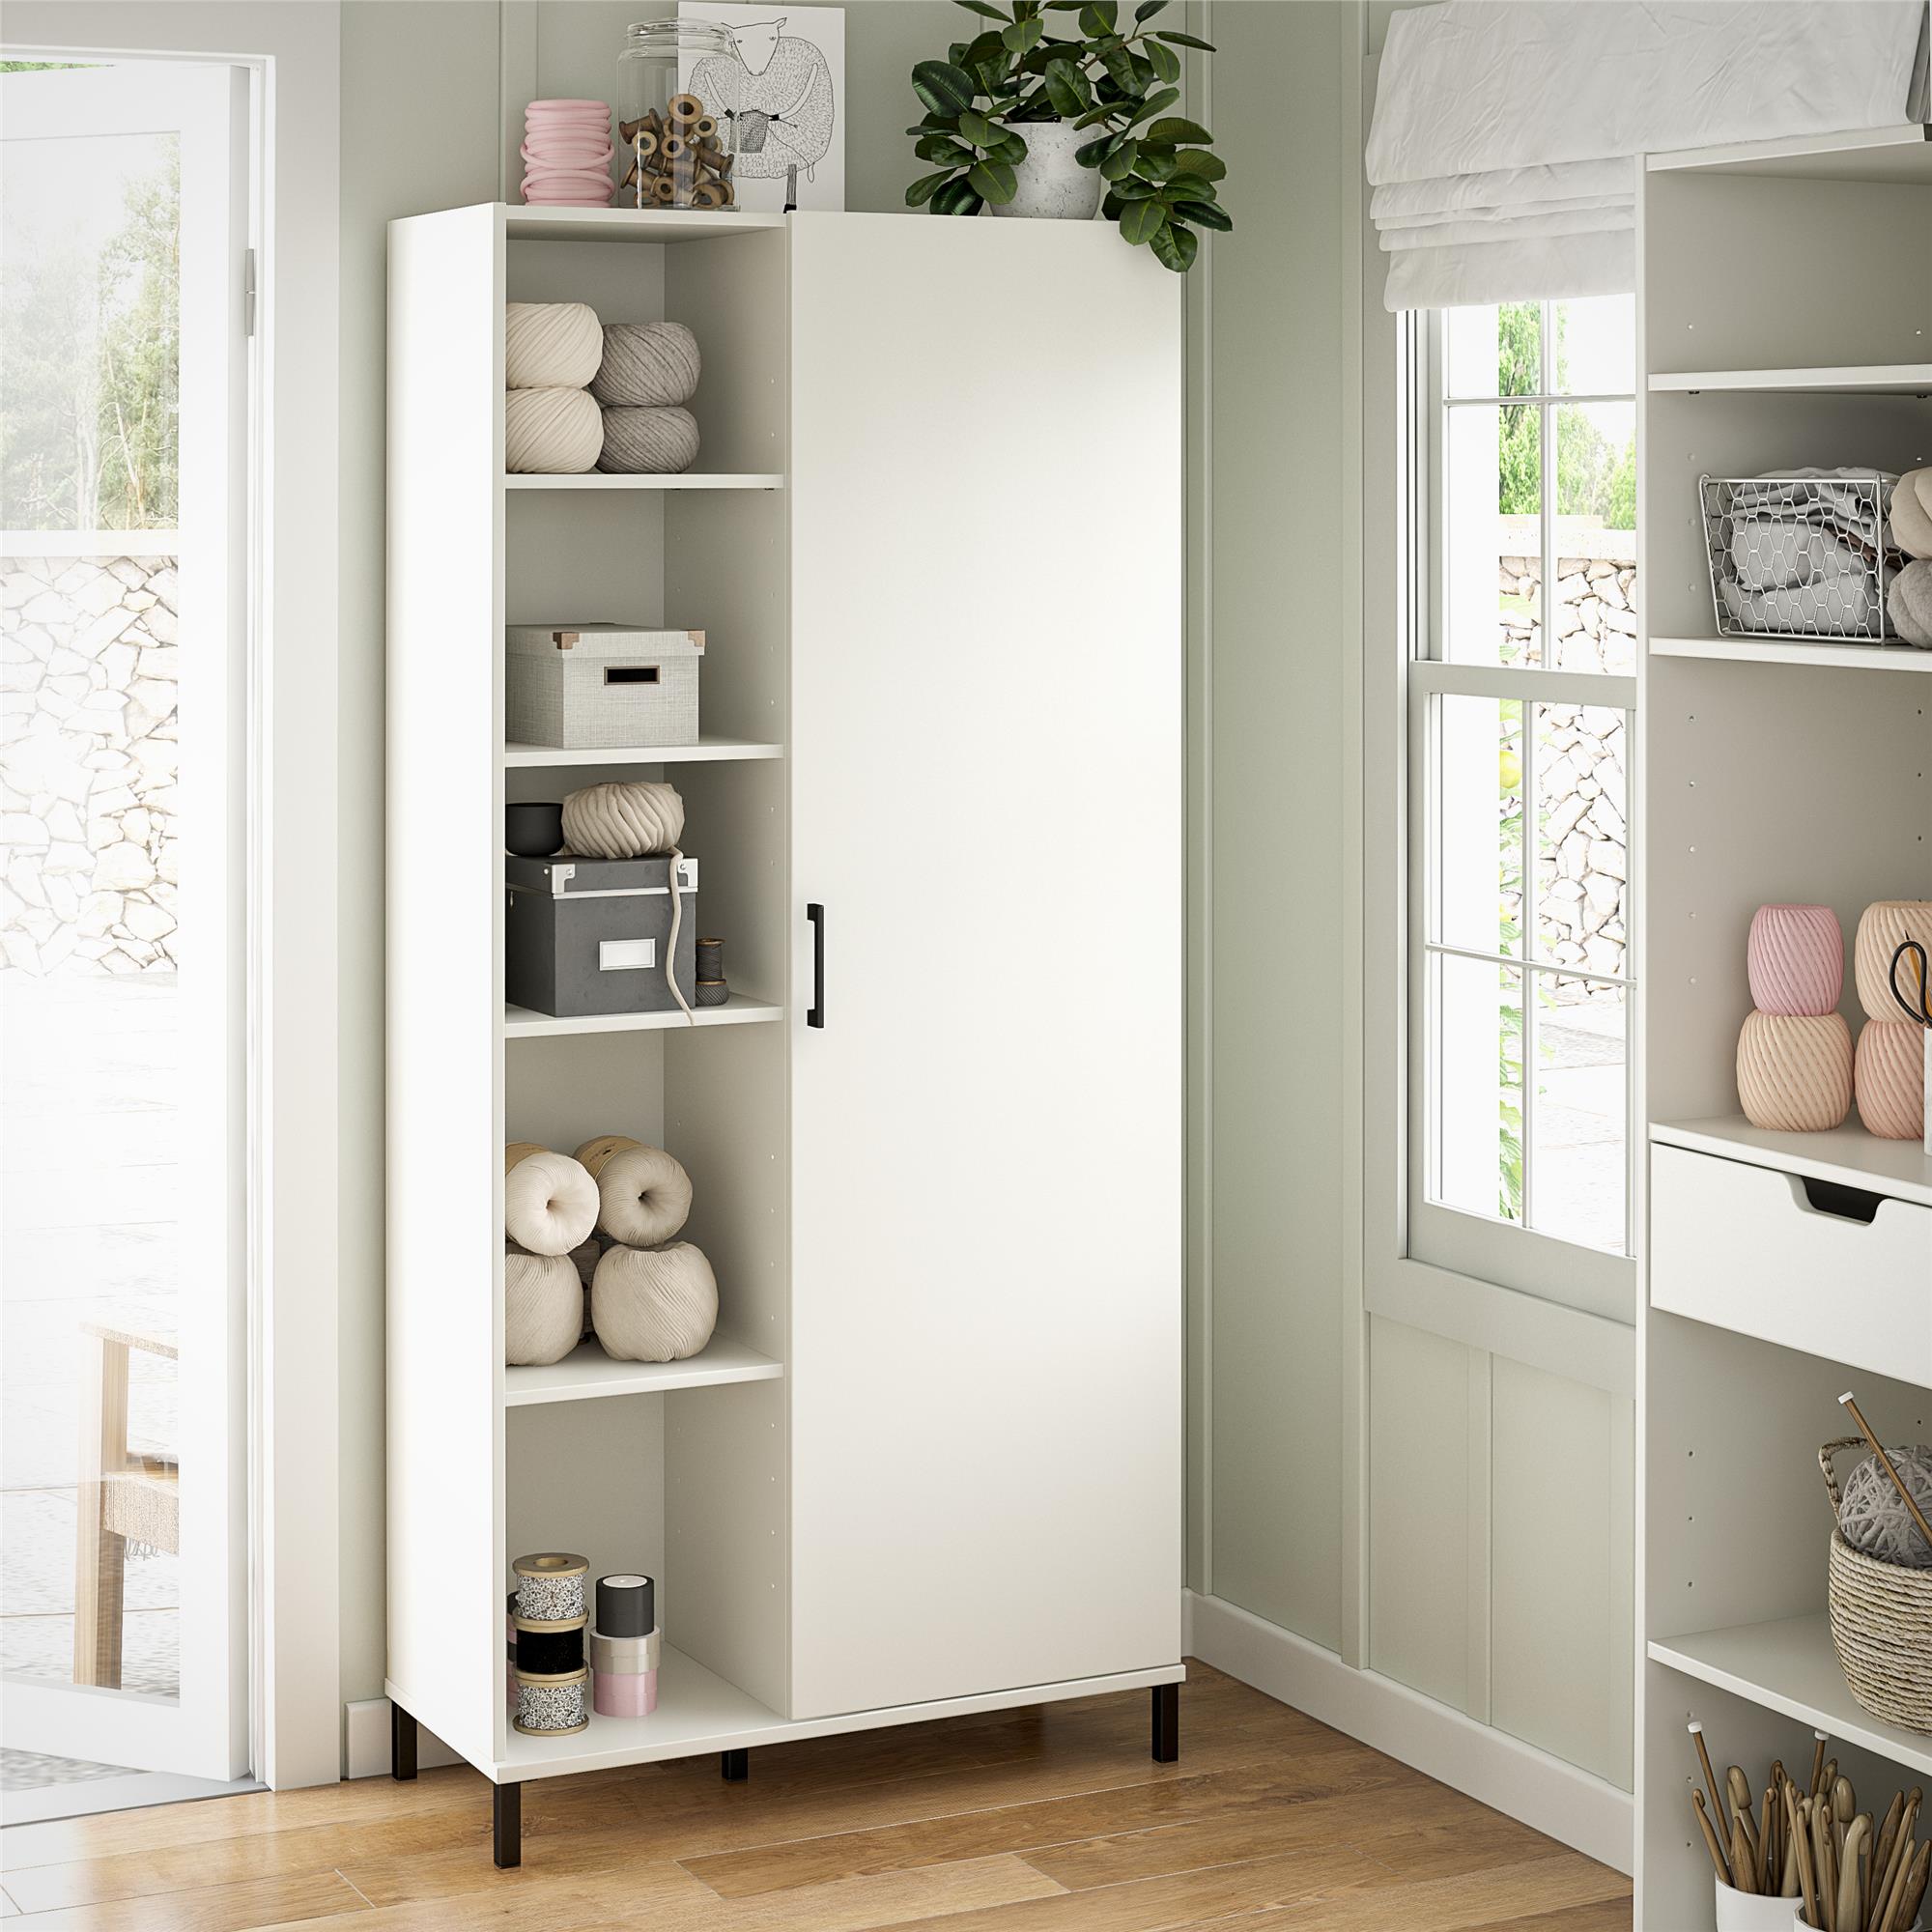 Versa Open Cabinet: Crafting Storage with Adjustable Shelving